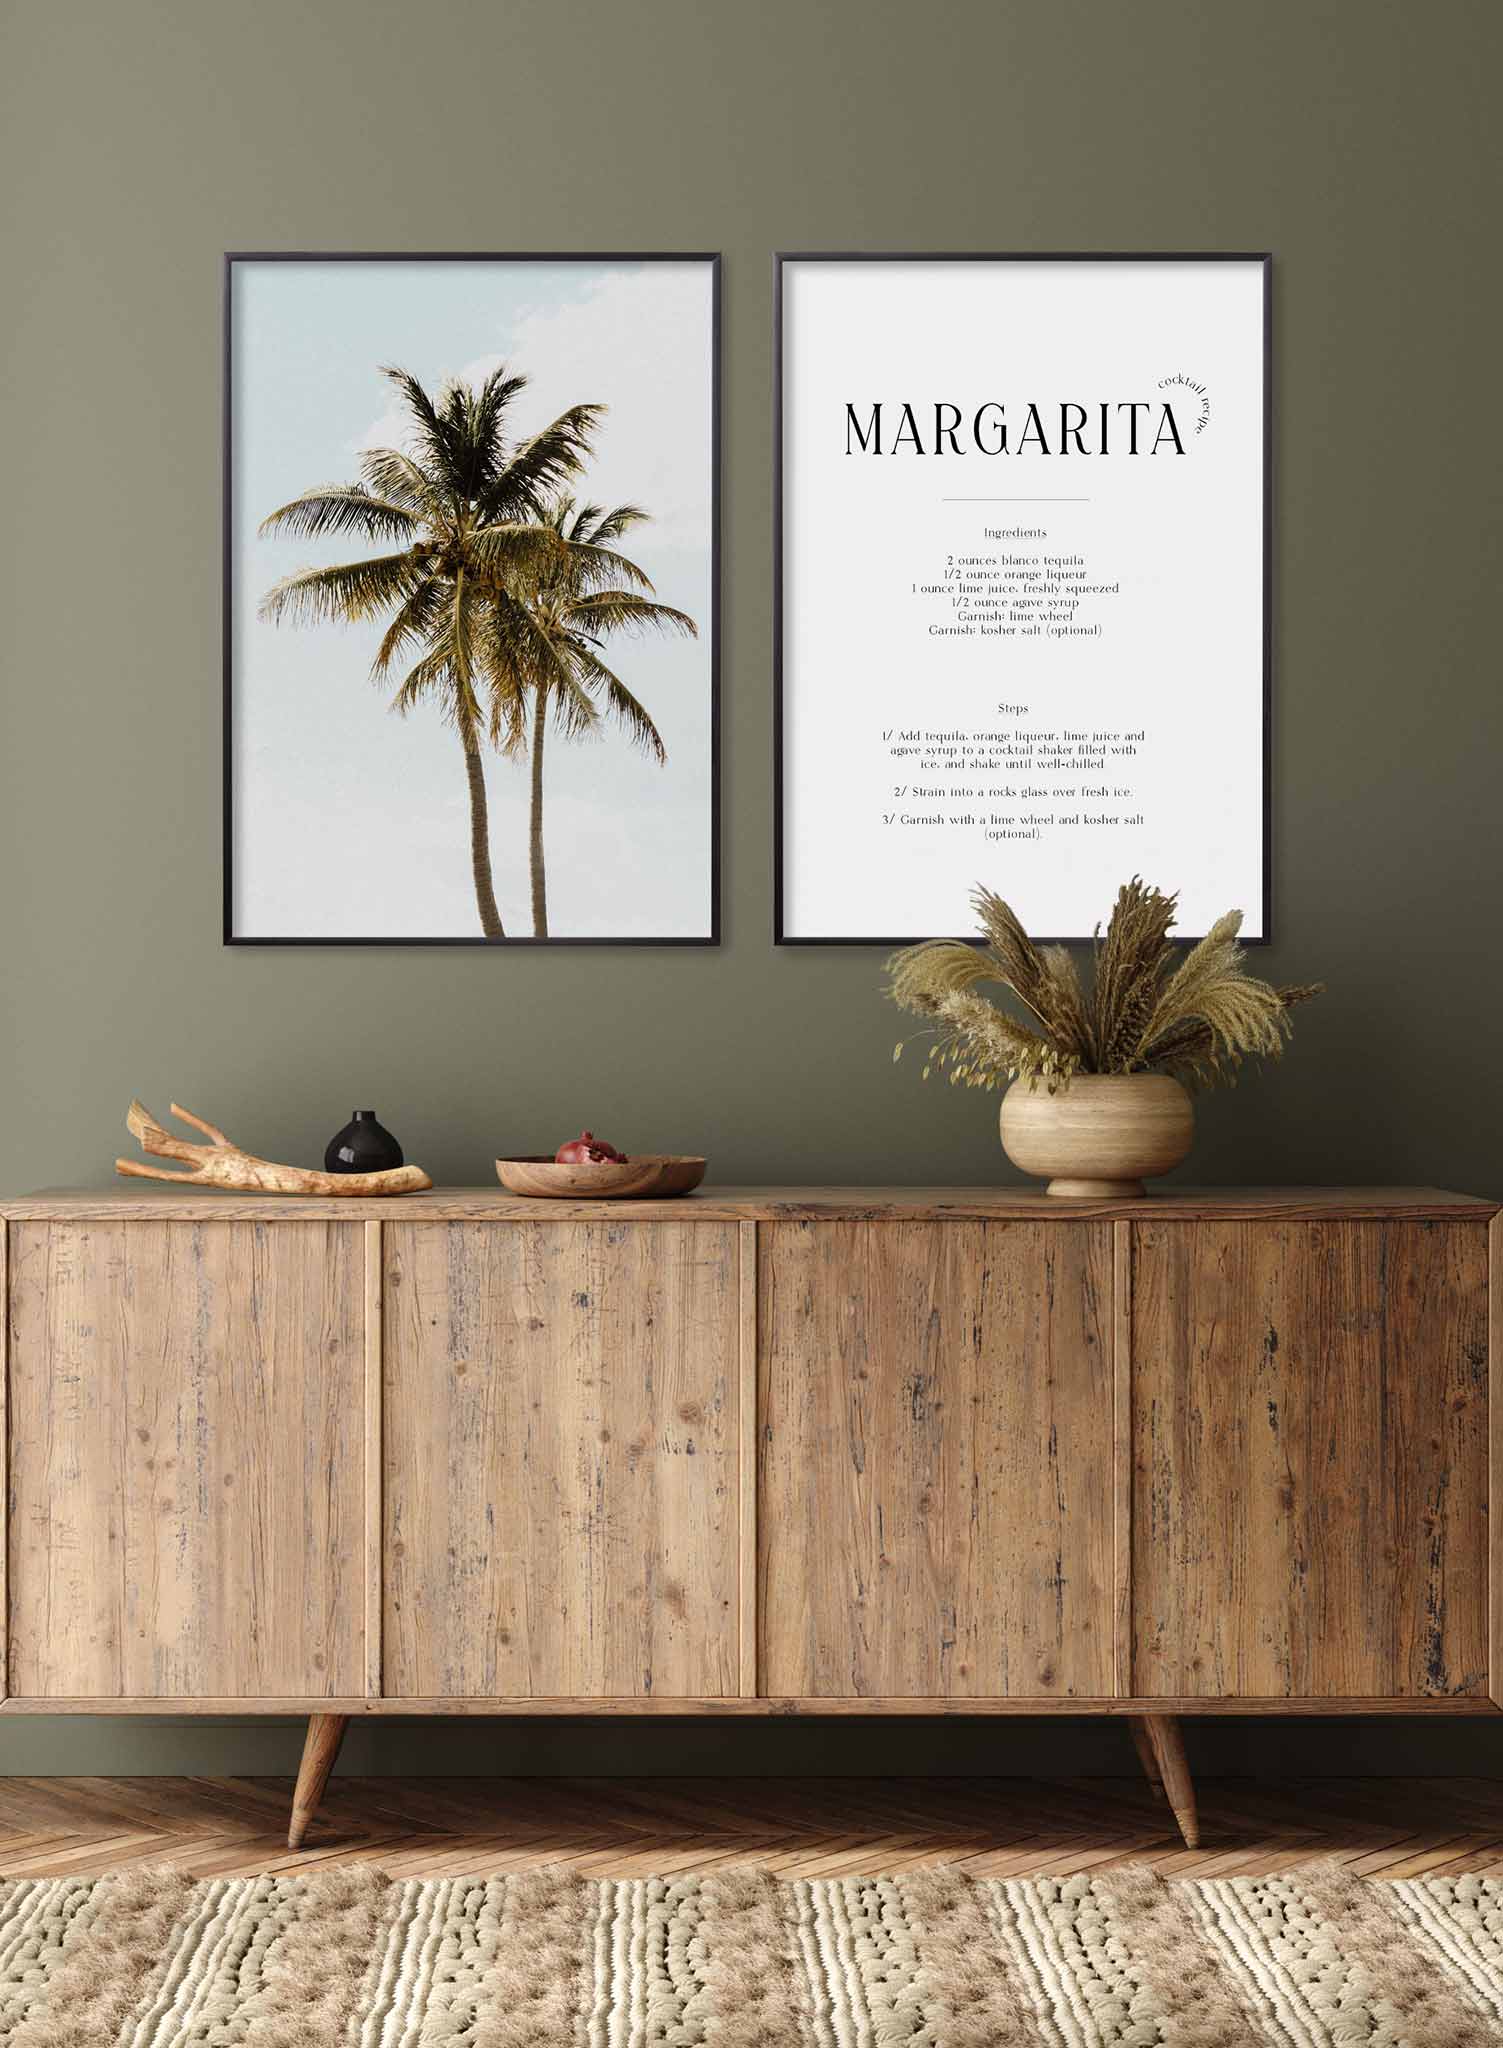 Margarita is a cocktail recipe typography poster by Opposite Wall.